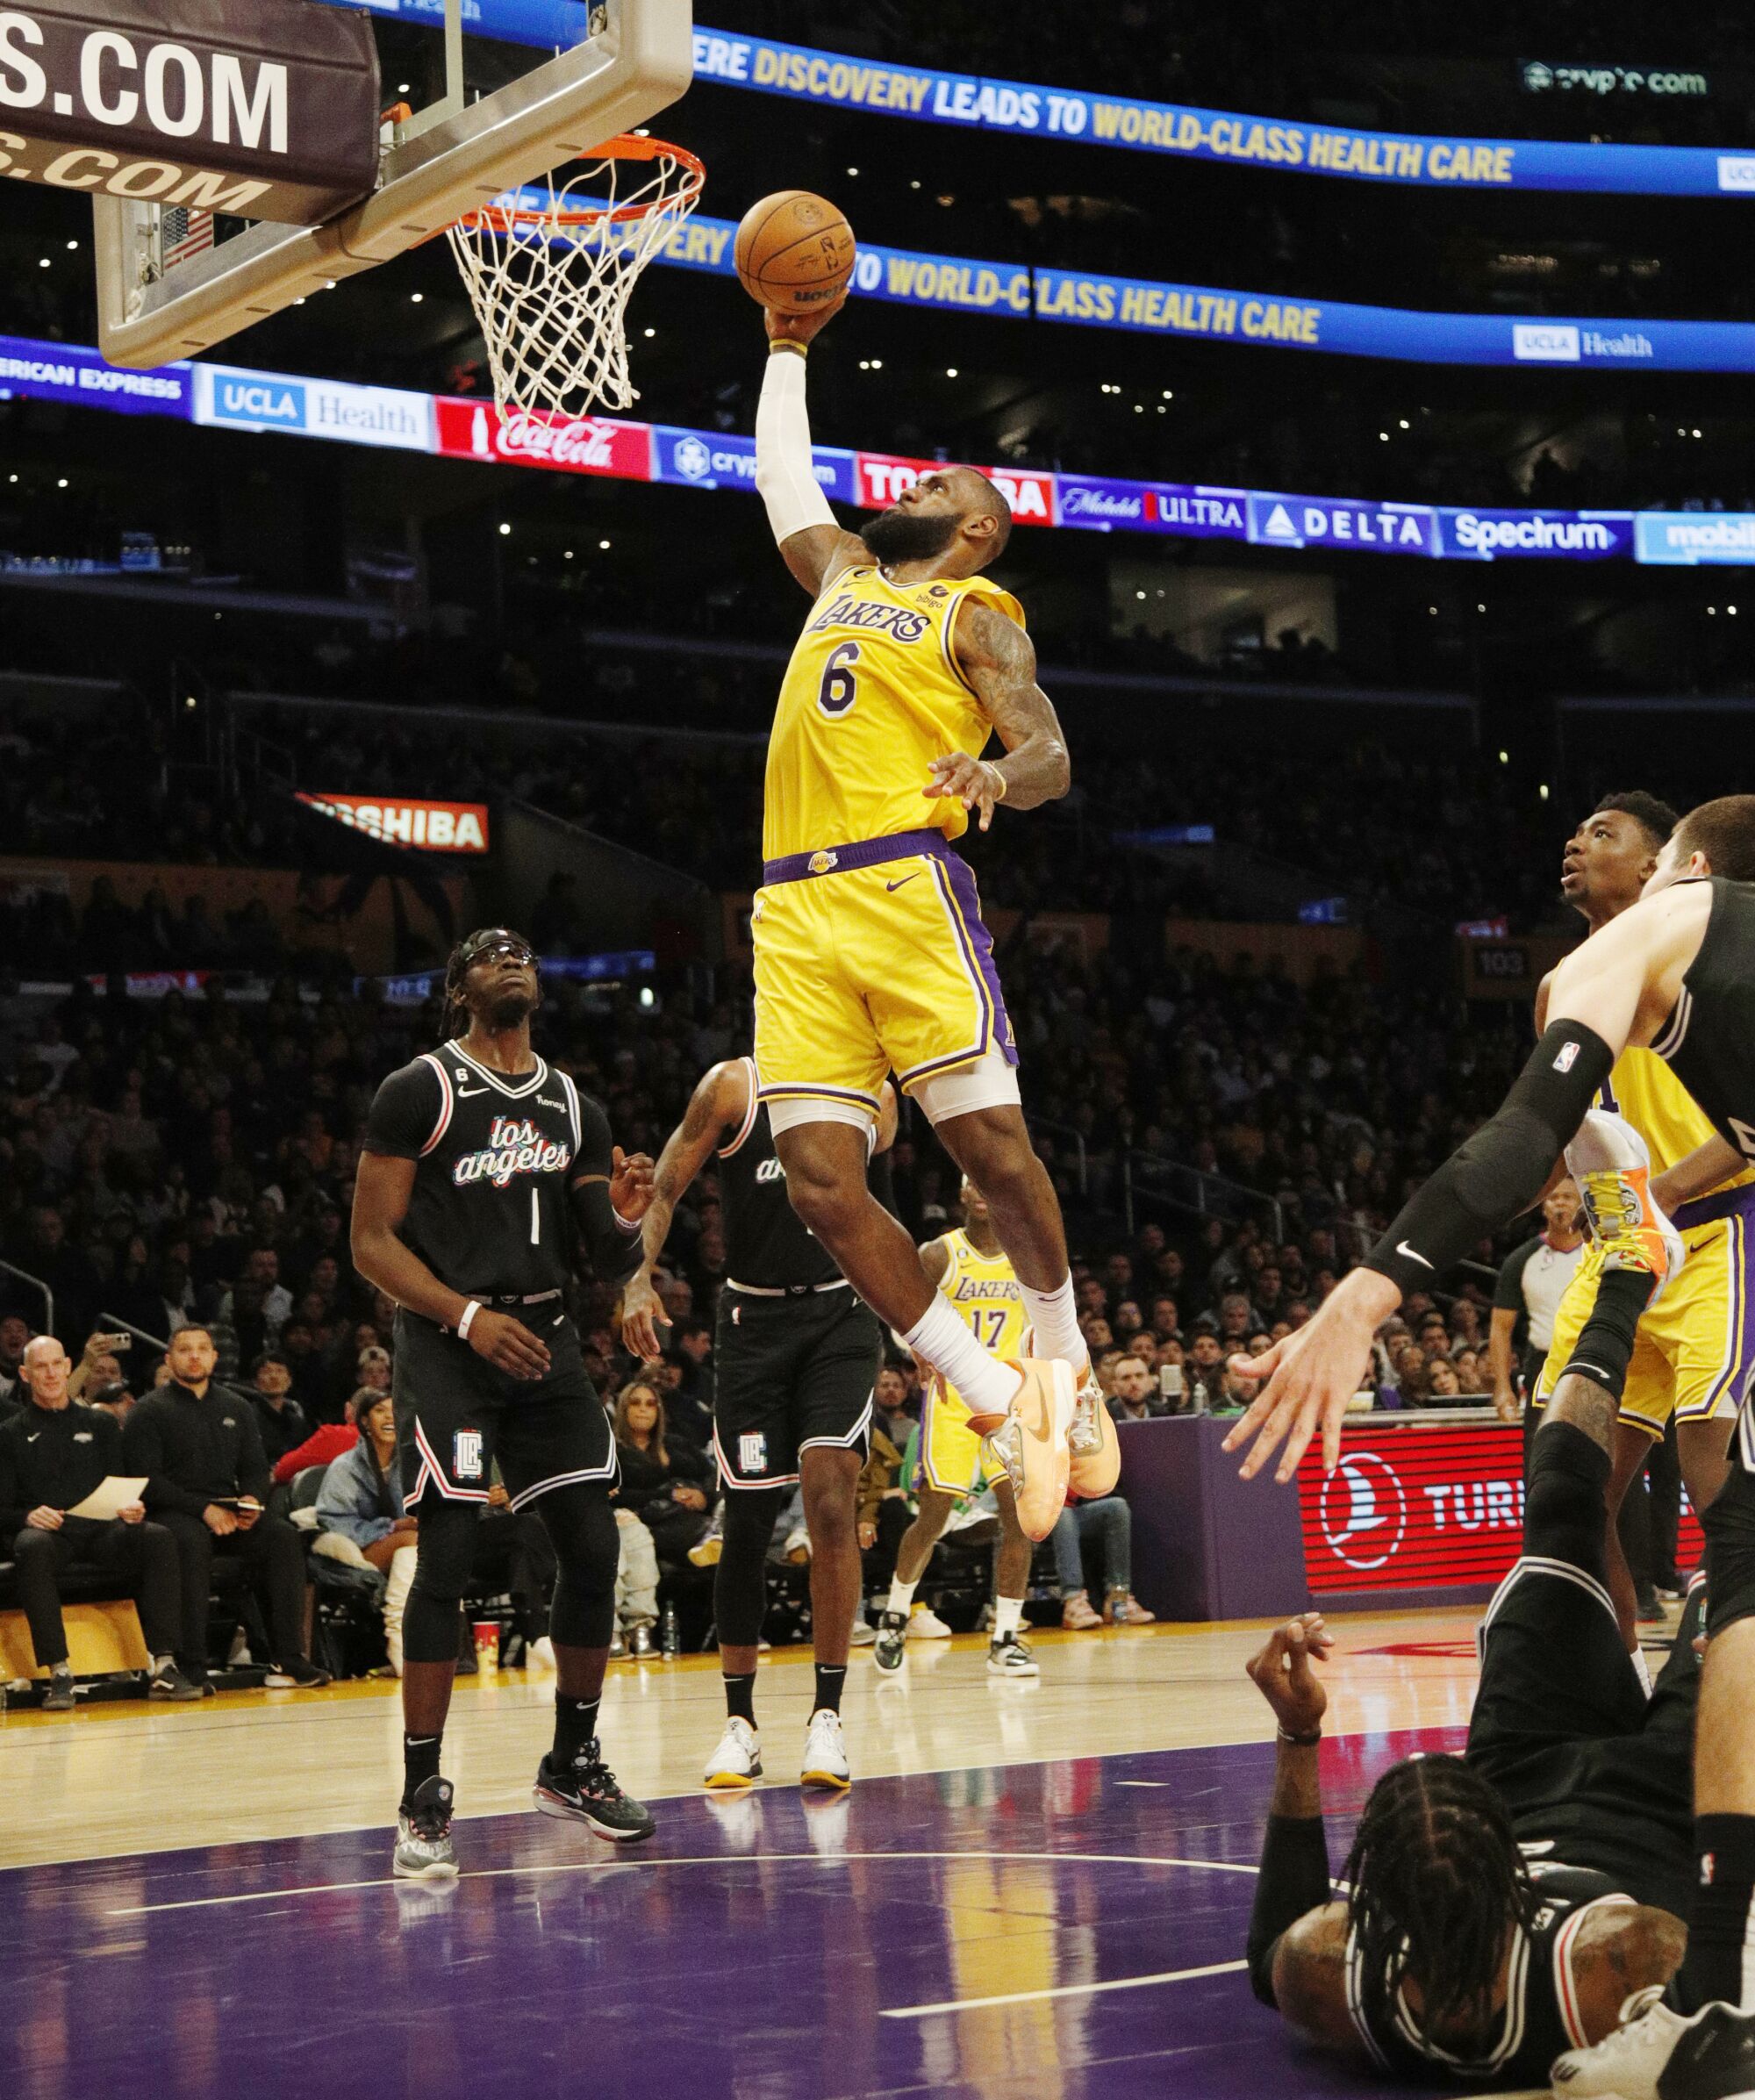 Lakers forward LeBron James (6) soars for a slam dunk against the Clippers.